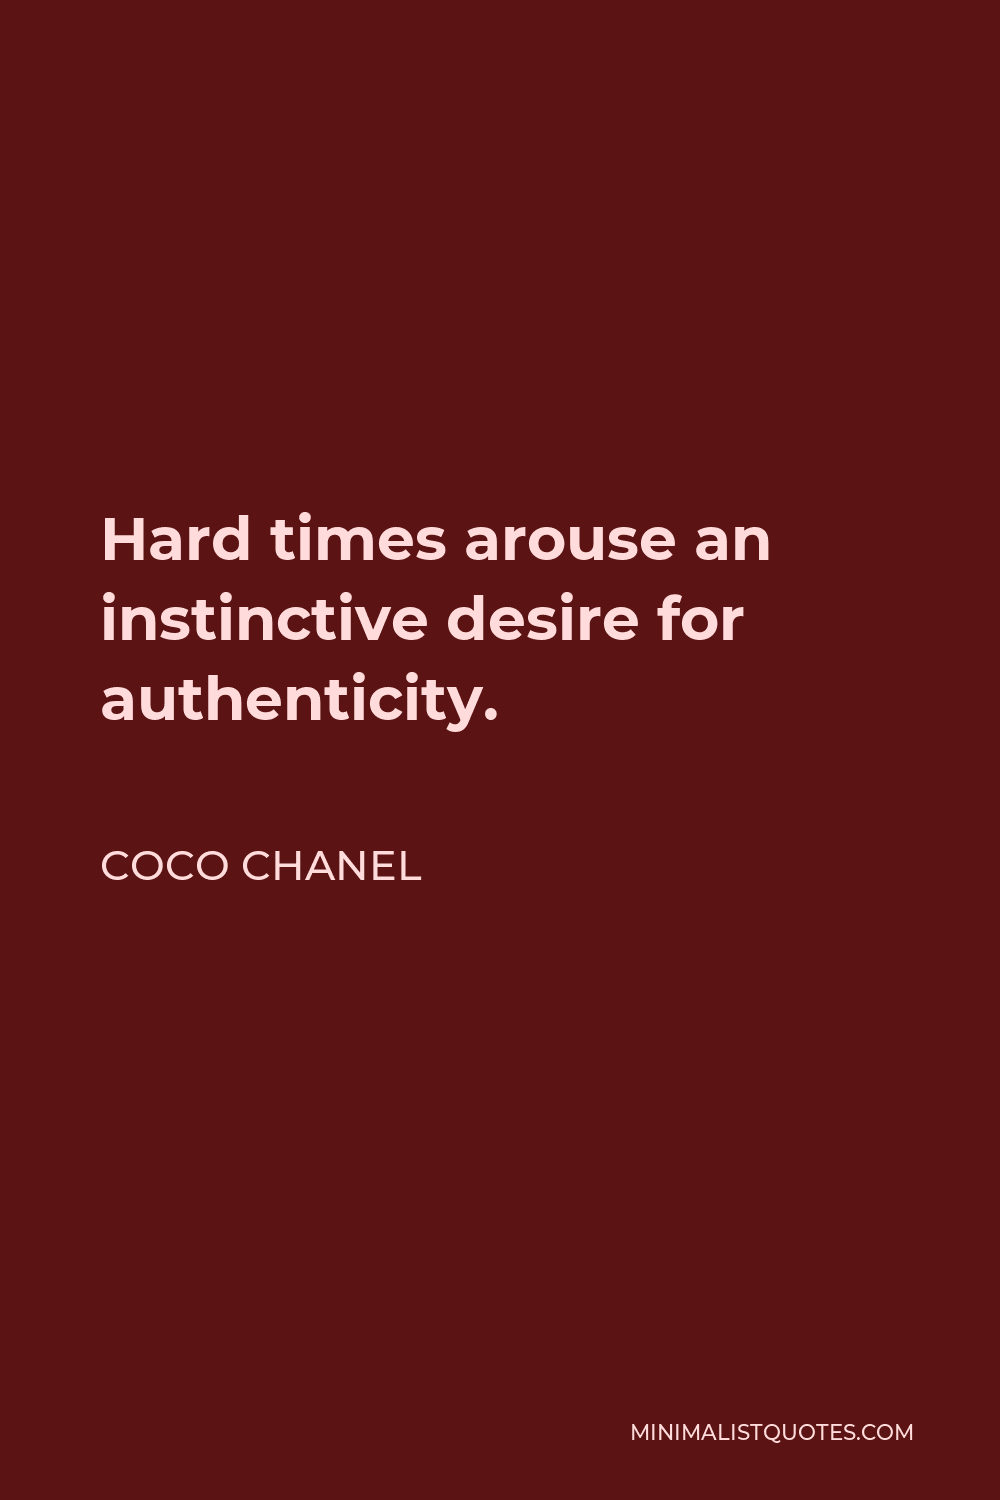 Coco Chanel Quote - Hard times arouse an instinctive desire for authenticity.